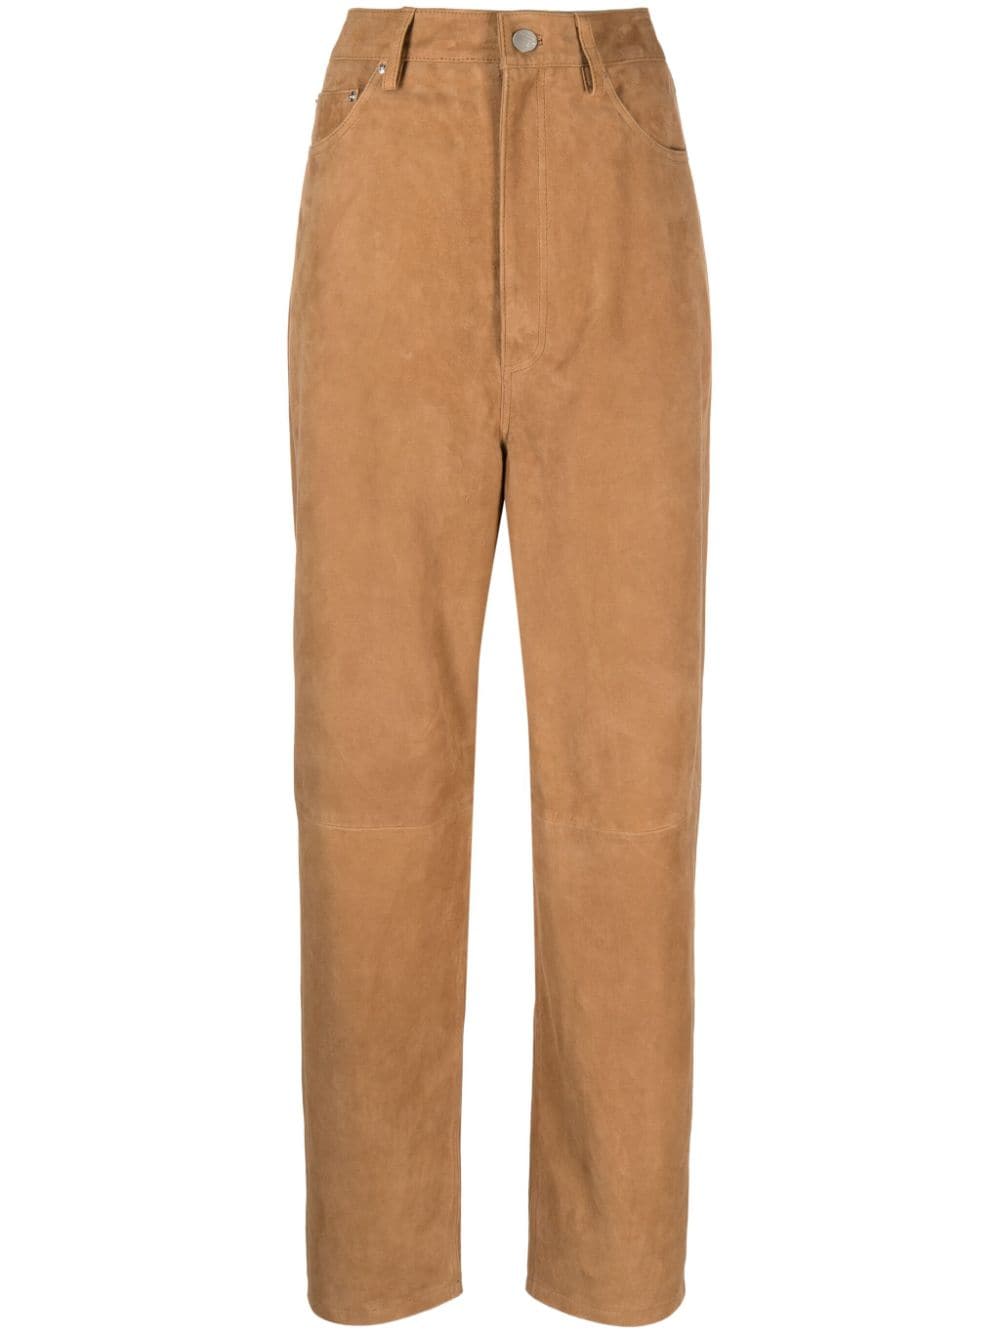 REMAIN BONDED-SEAMED SUEDE COCOON TROUSERS